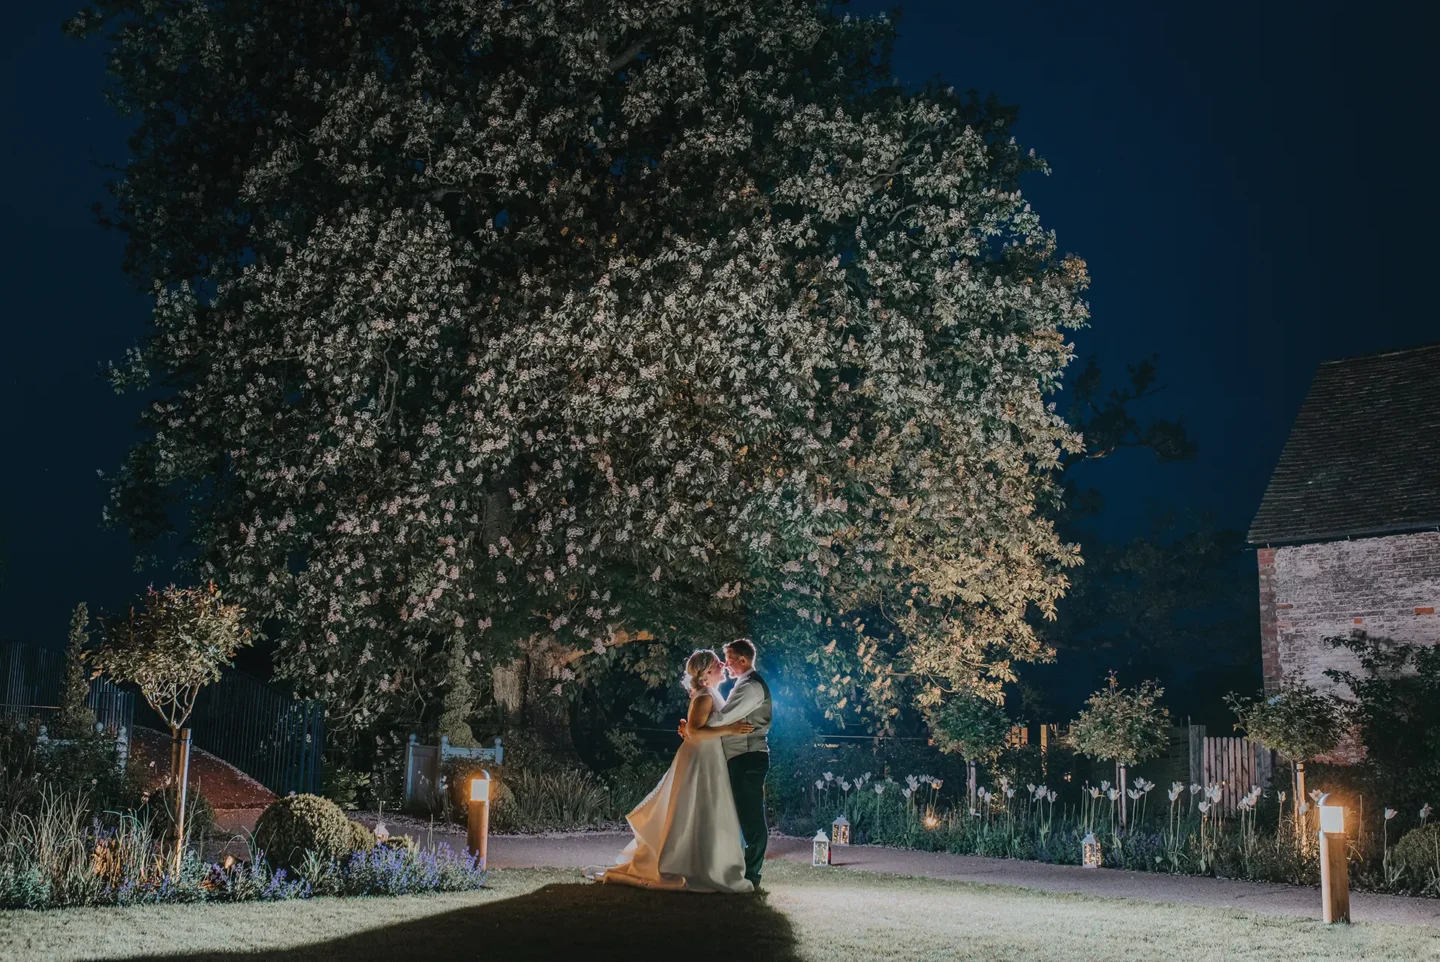 bride and groom by a tree in the garden at night